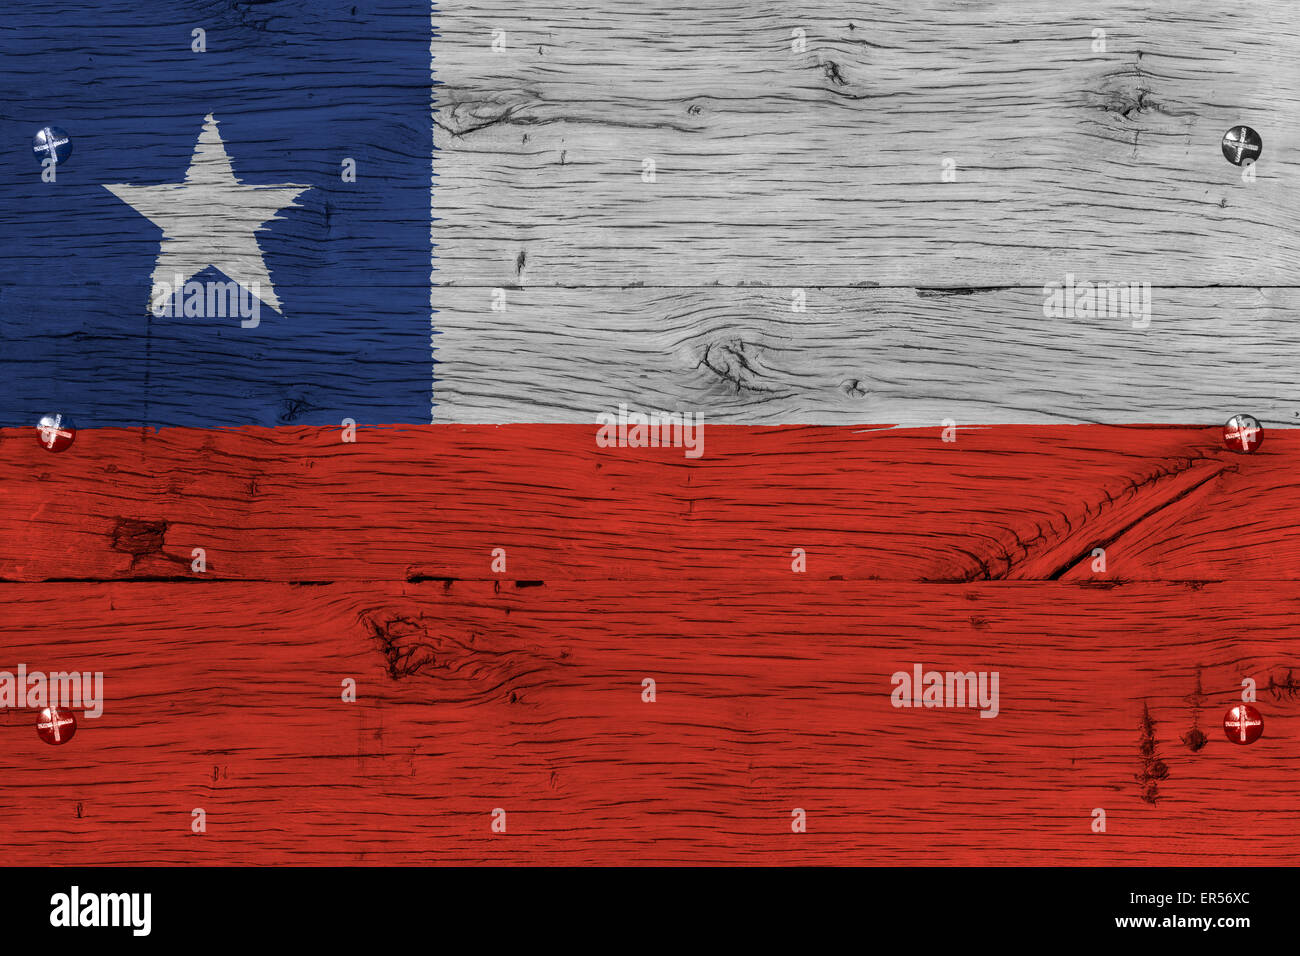 Chile national flag. Painting is colorful on old oak wood of train carriage. Fastened by screws or bolts. Stock Photo